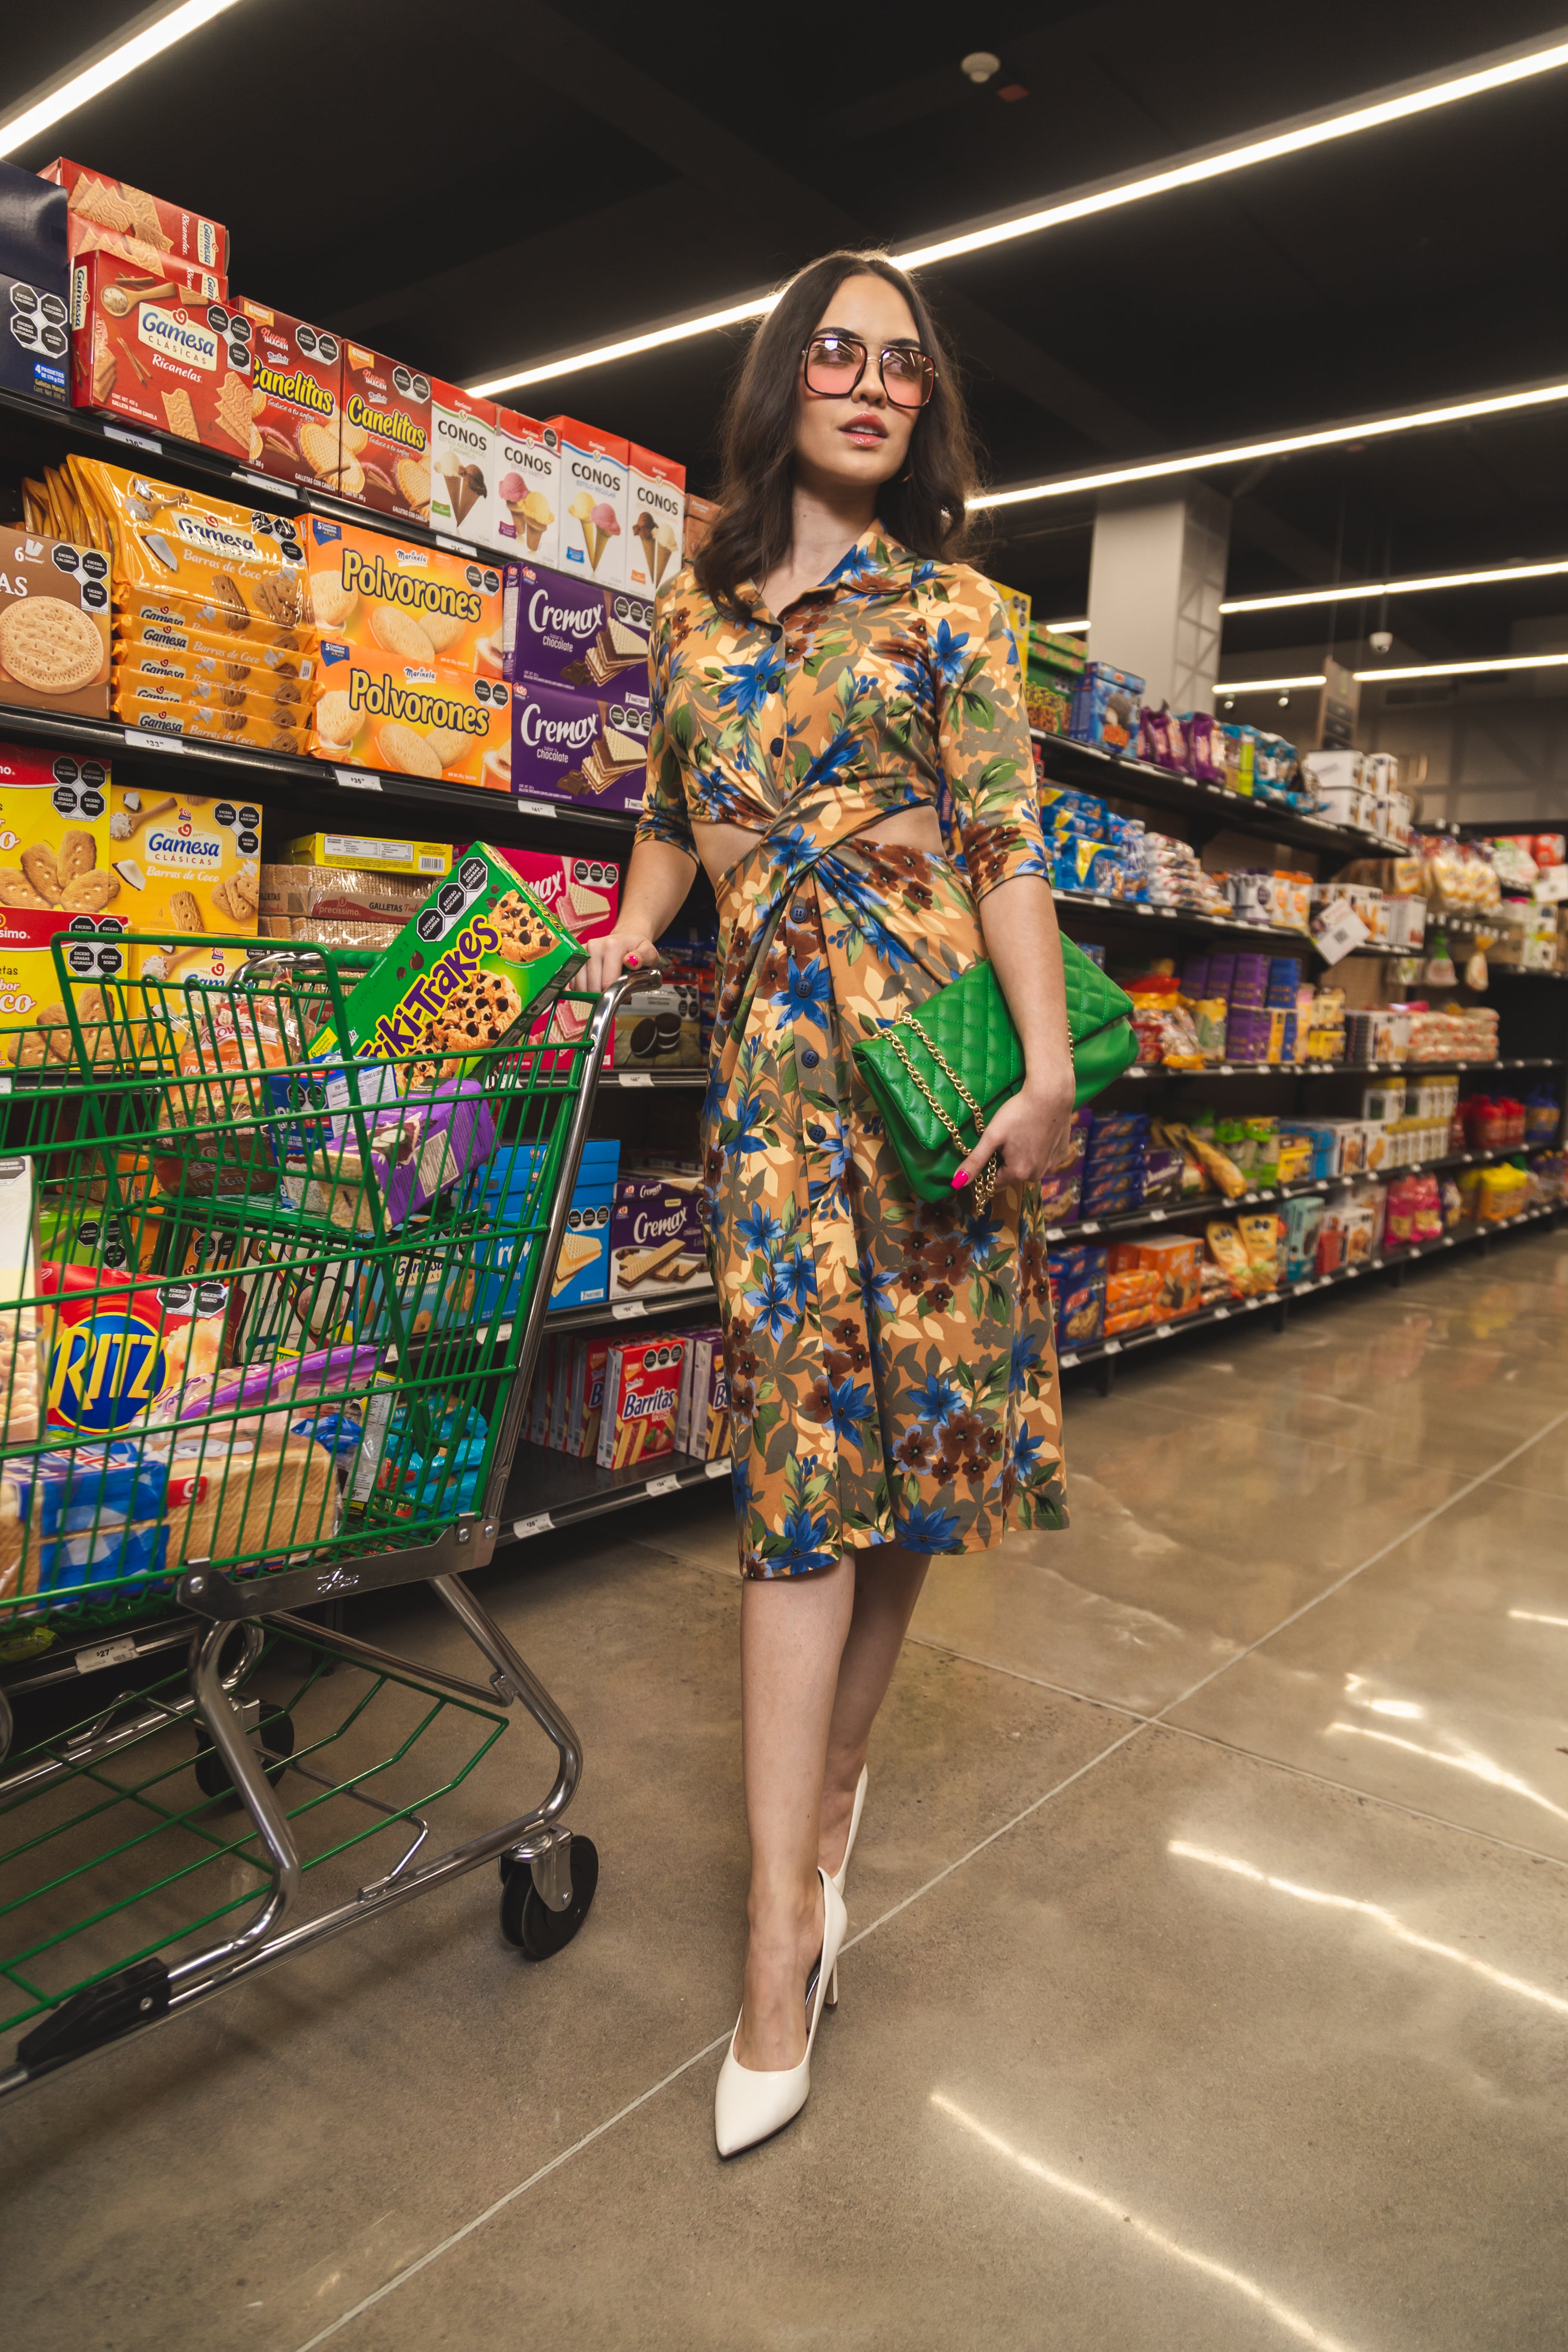 A woman holding a shopping cart. | Source: Pexels